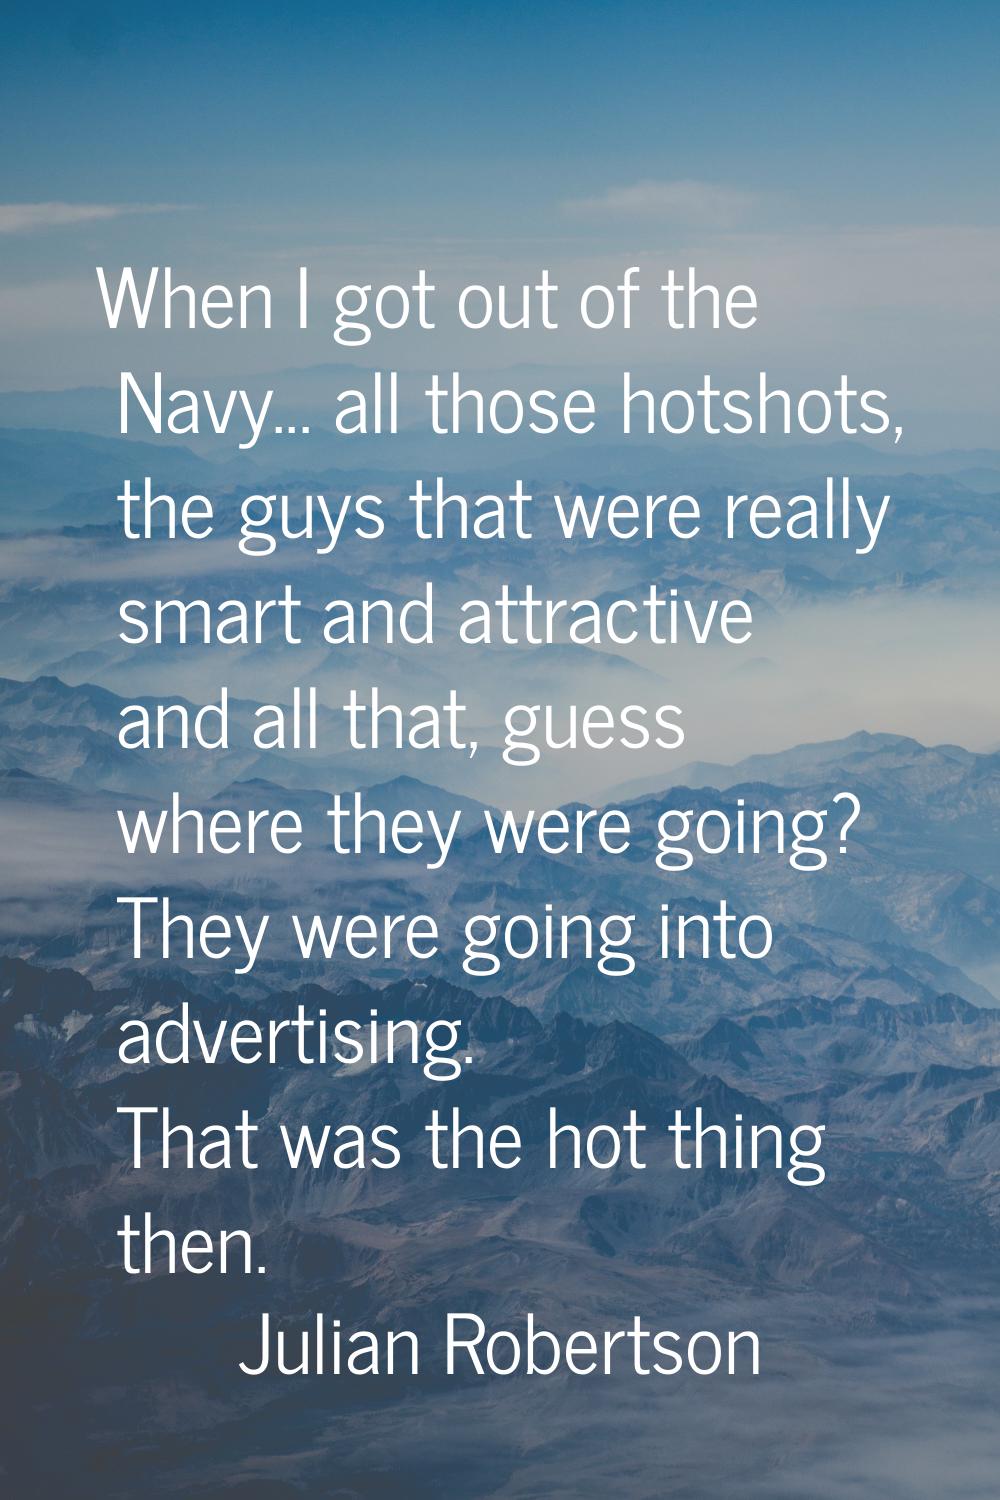 When I got out of the Navy... all those hotshots, the guys that were really smart and attractive an